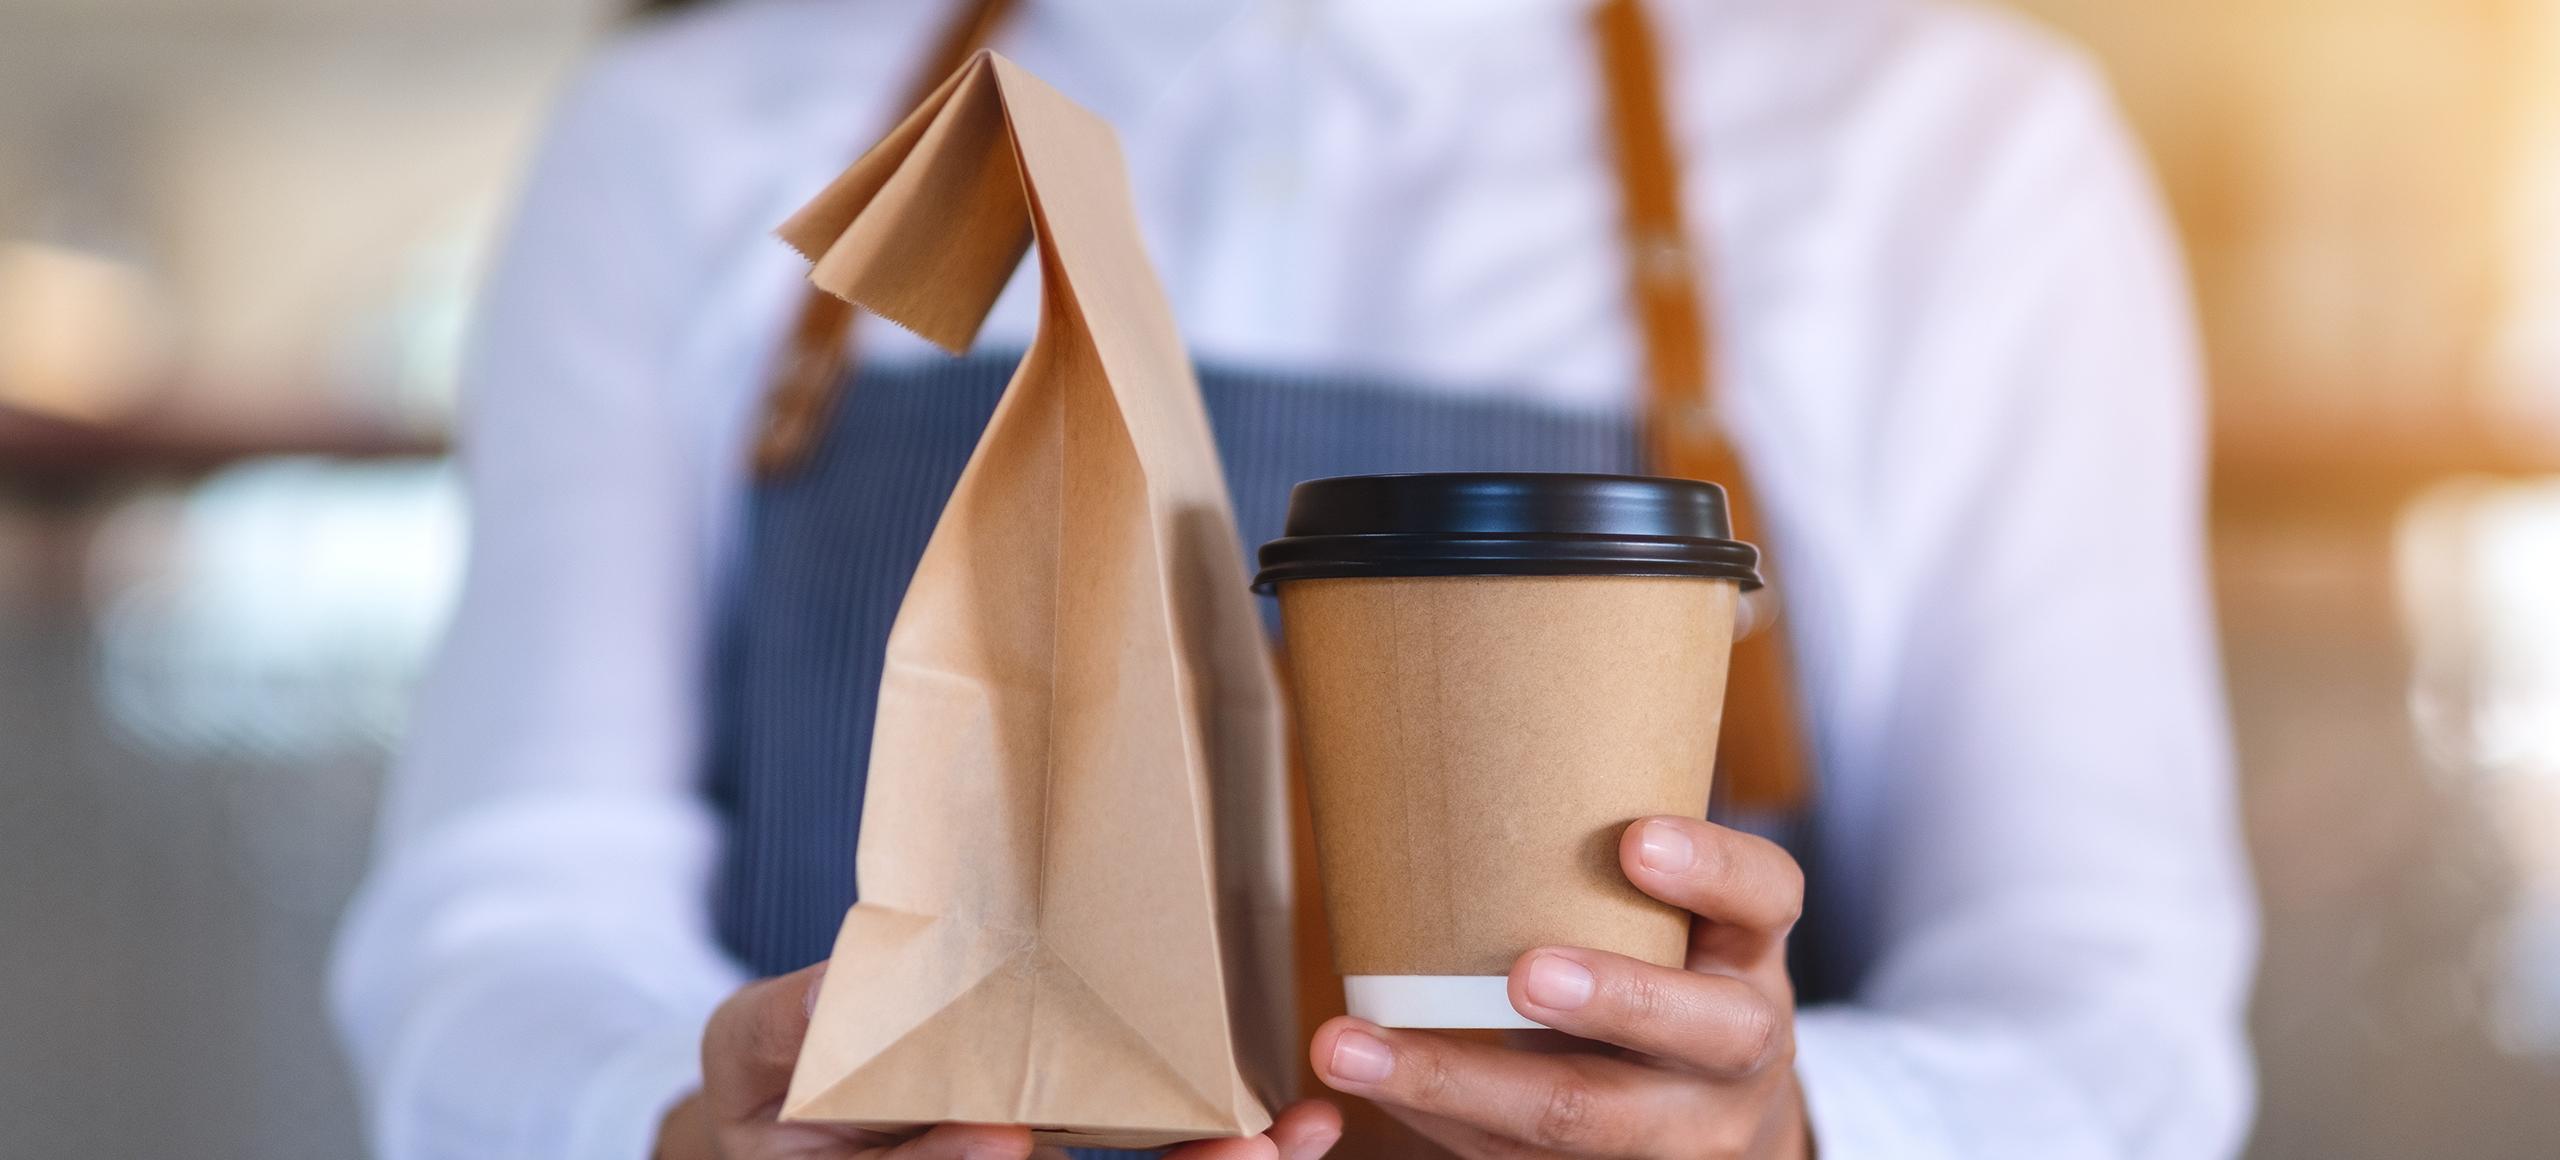 A person holding a takeaway bag and cup.